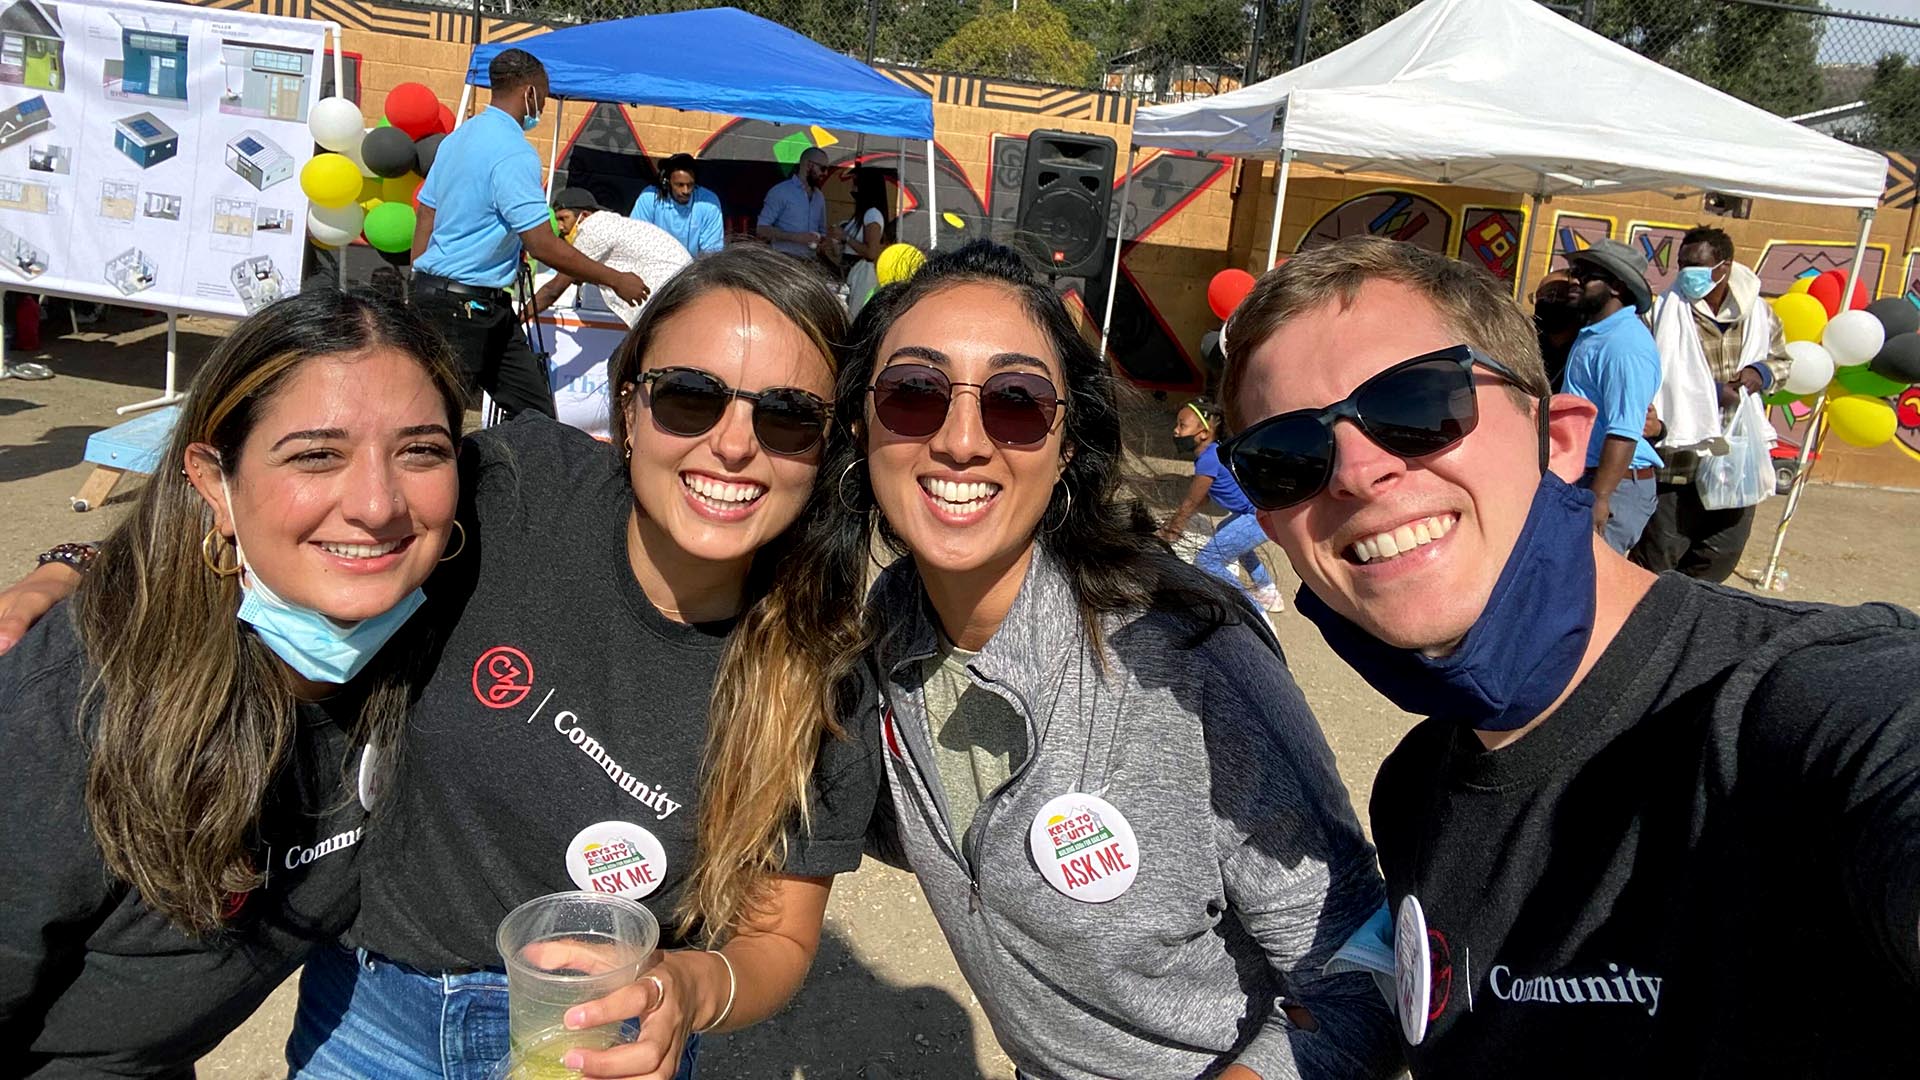 A group of CZI employees smile for a photo at an outdoor community event.